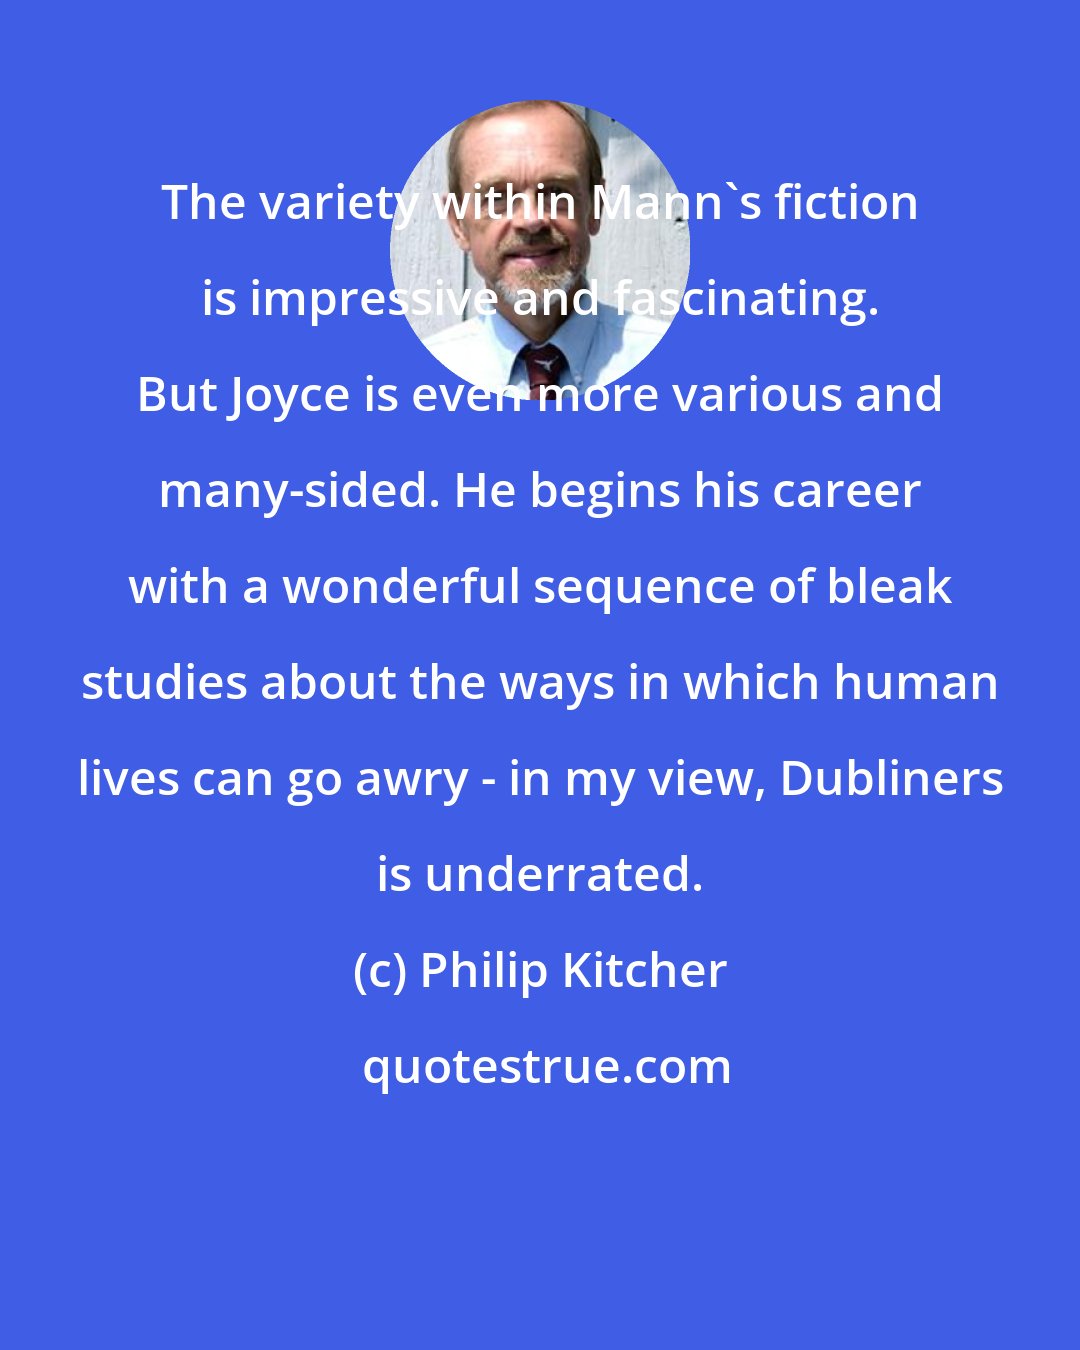 Philip Kitcher: The variety within Mann's fiction is impressive and fascinating. But Joyce is even more various and many-sided. He begins his career with a wonderful sequence of bleak studies about the ways in which human lives can go awry - in my view, Dubliners is underrated.